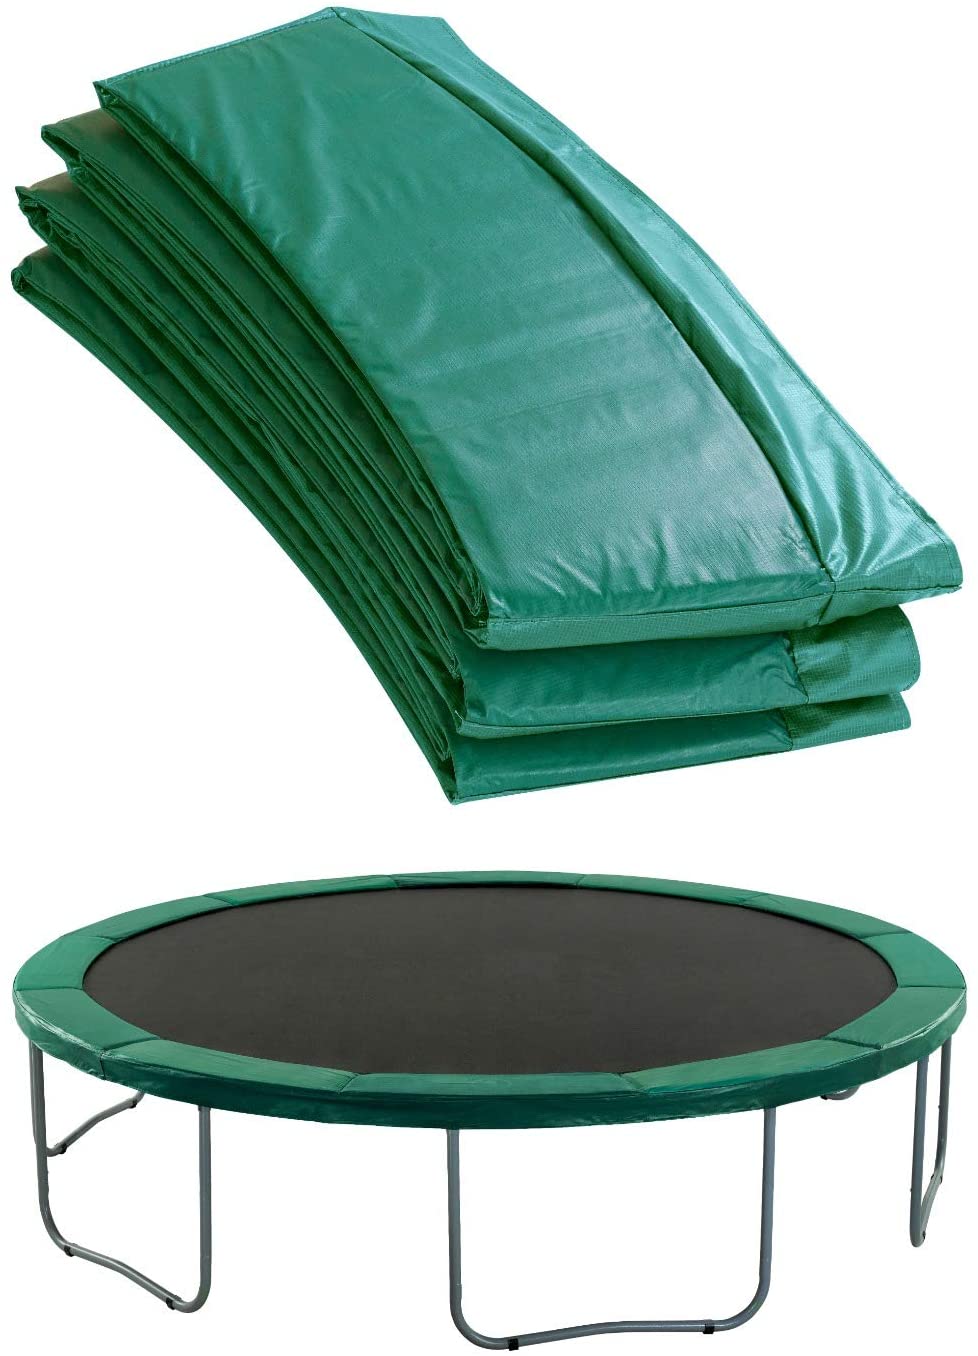 Super Trampoline Replacement Safety Pads (Spring Cover)